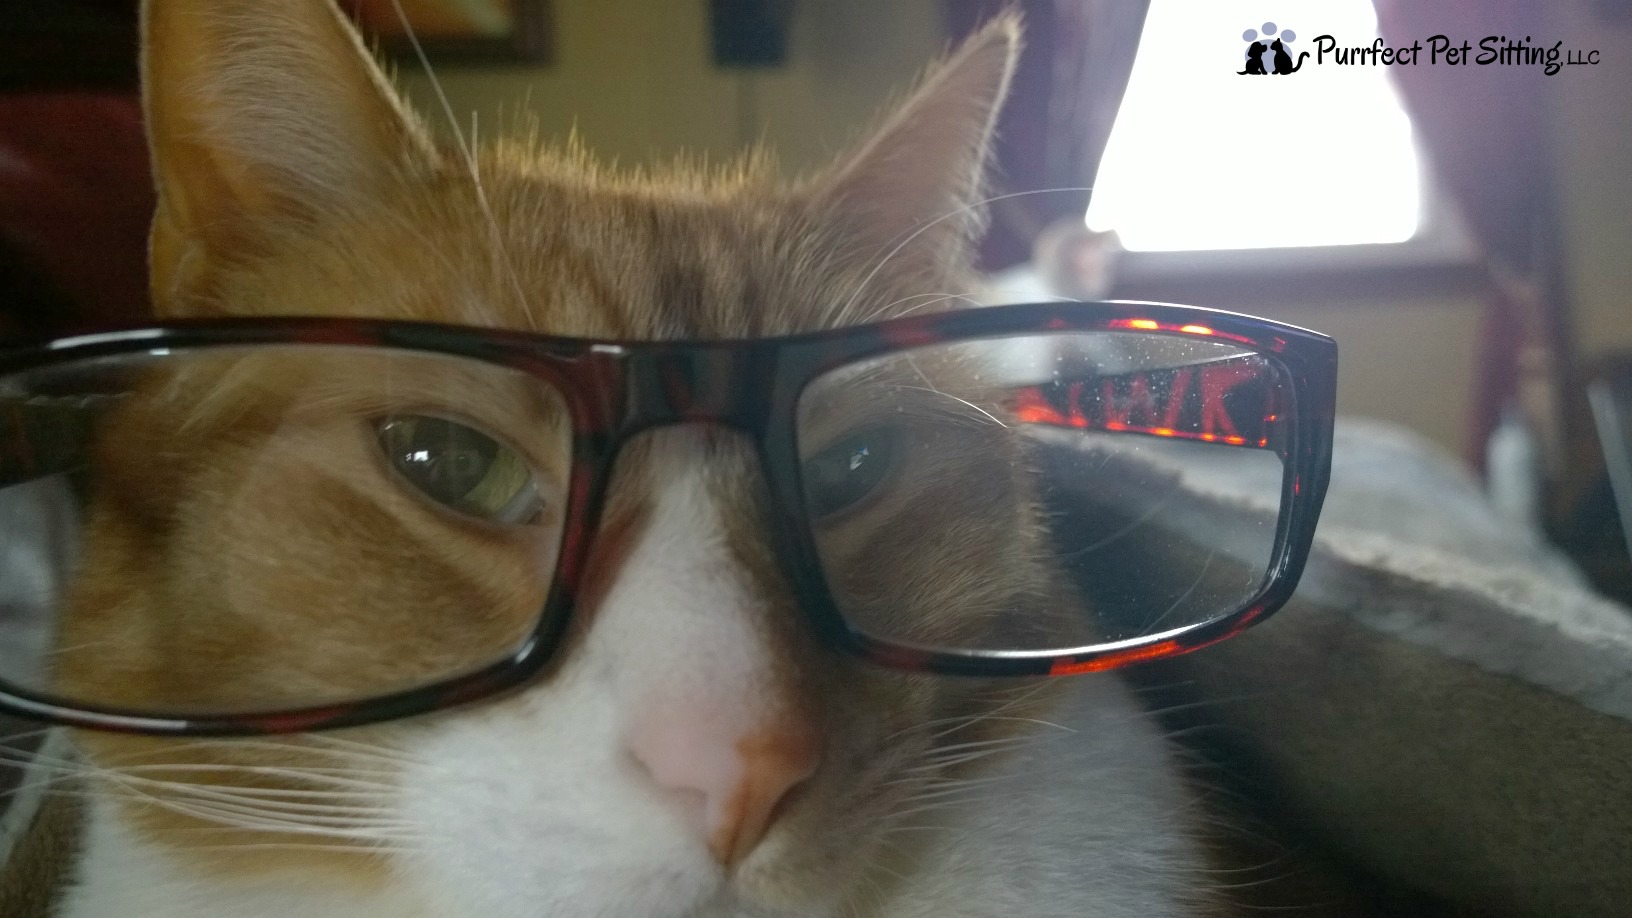 cat with glasses